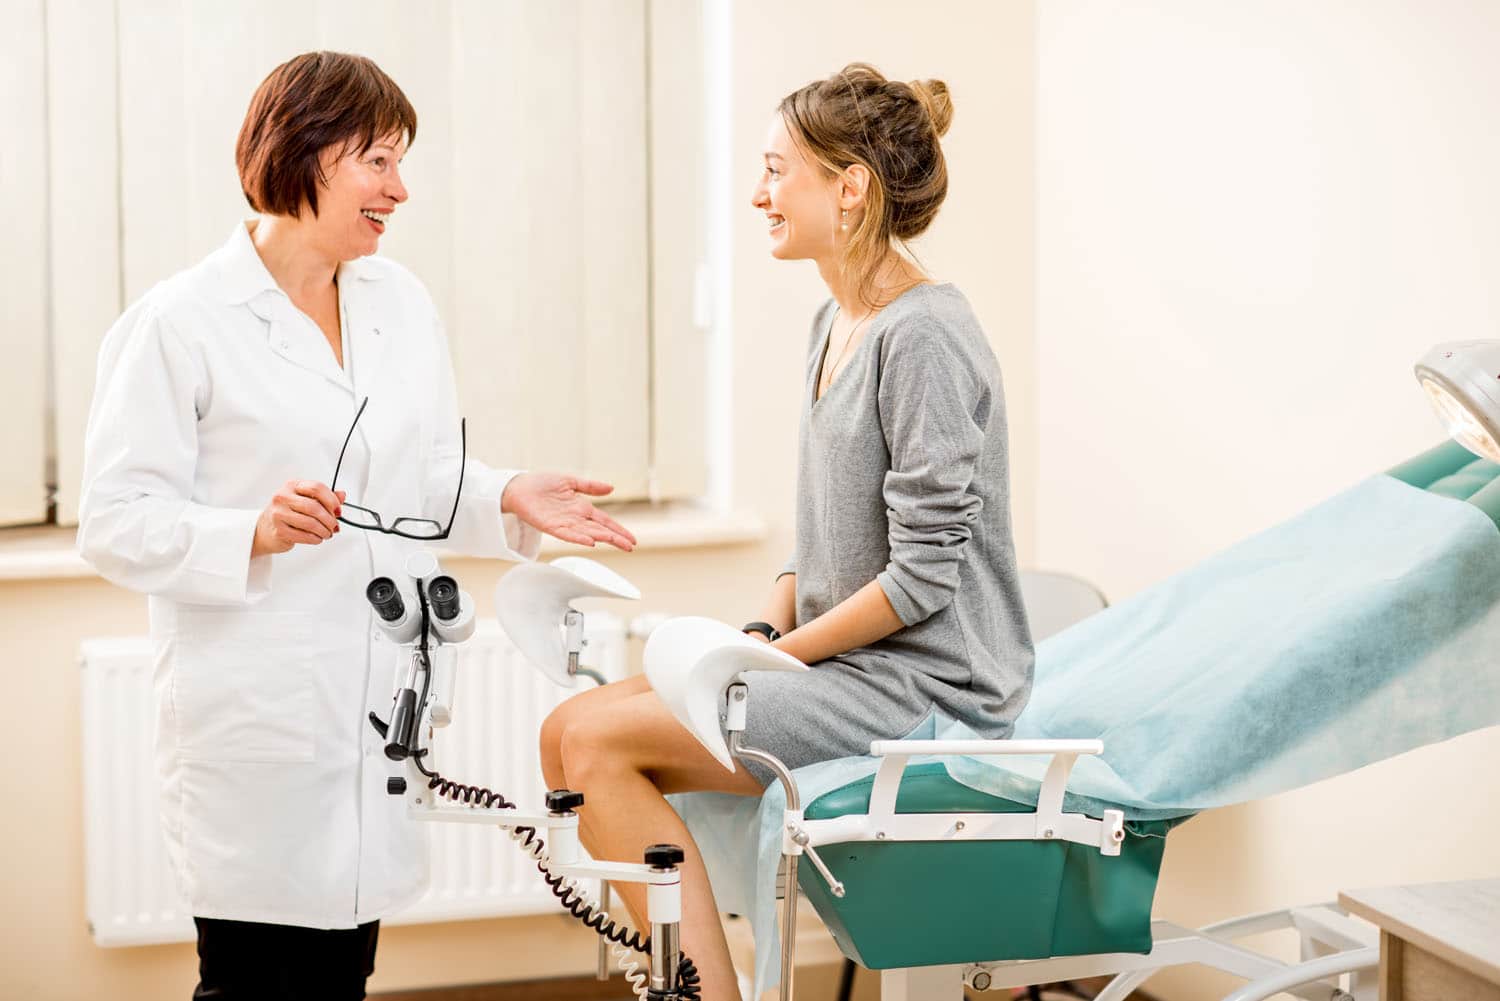 gyn - Crucial Considerations While Choosing an OBGYN During Your Pregnancy